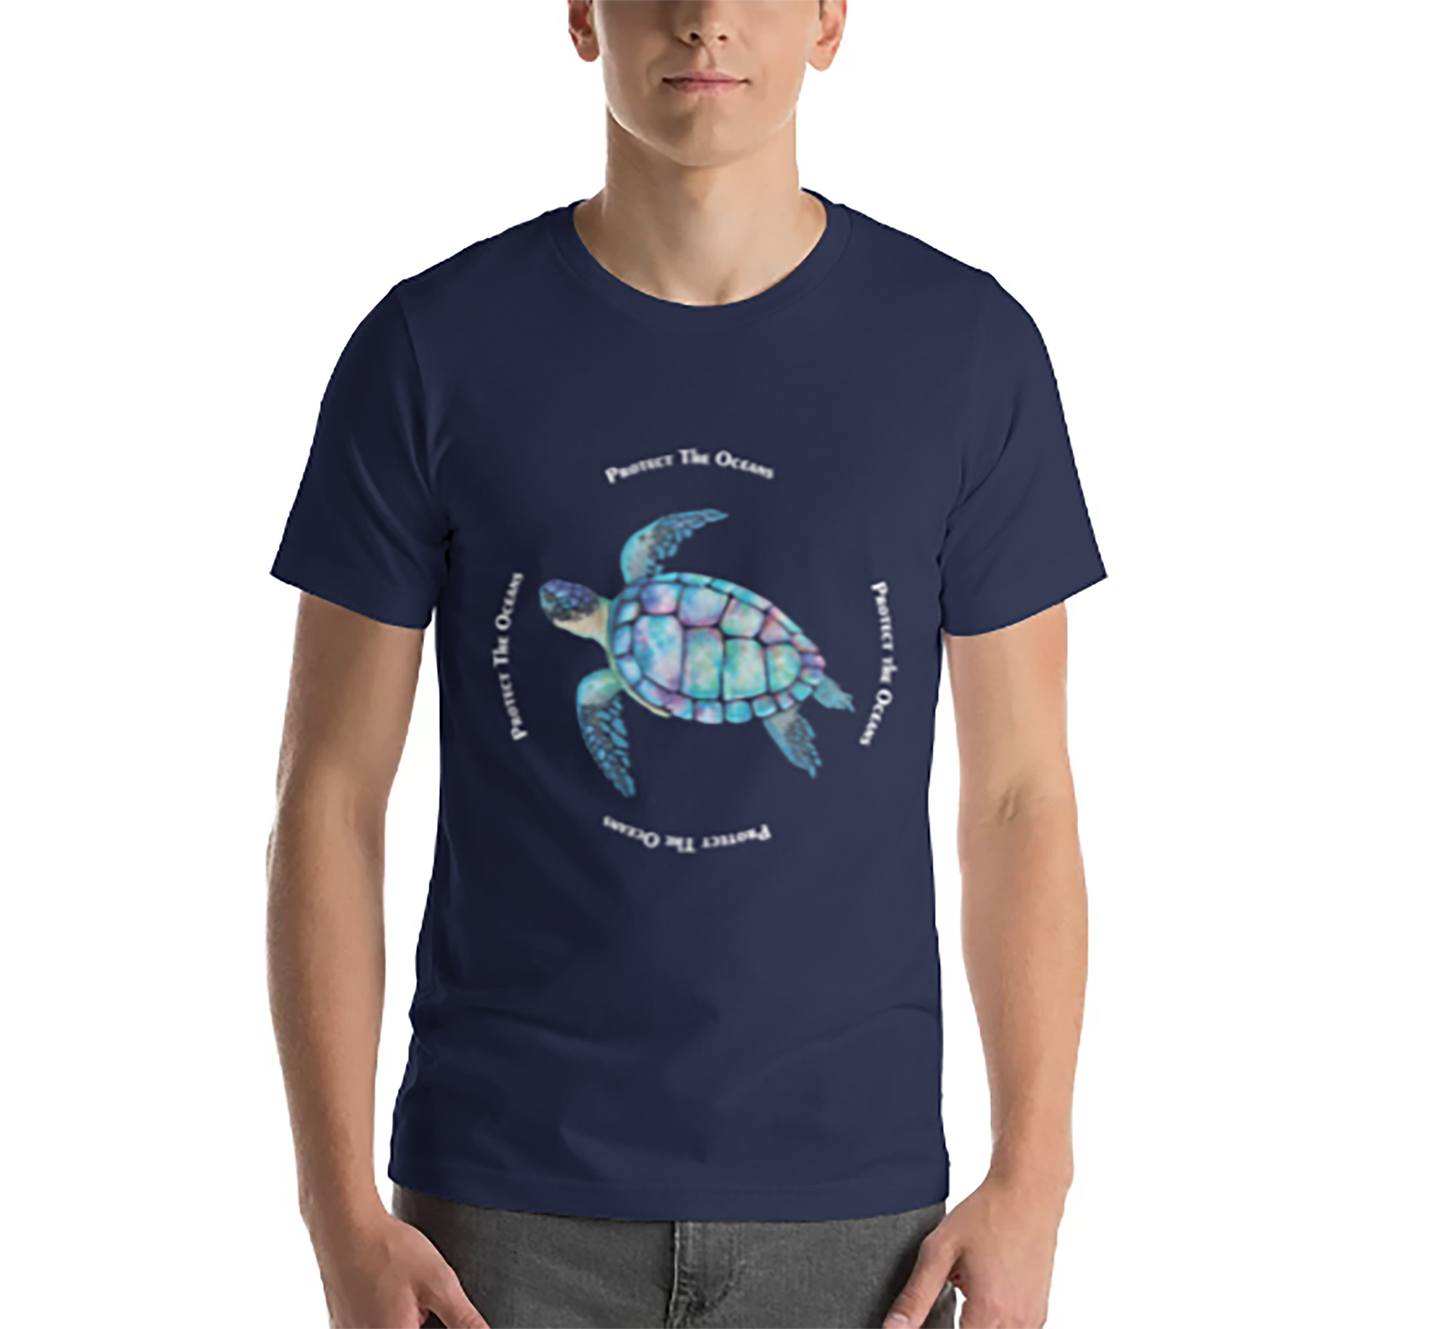 Women and Men's (Unisex)  T-Shirt Printed with a Turtle on Navy